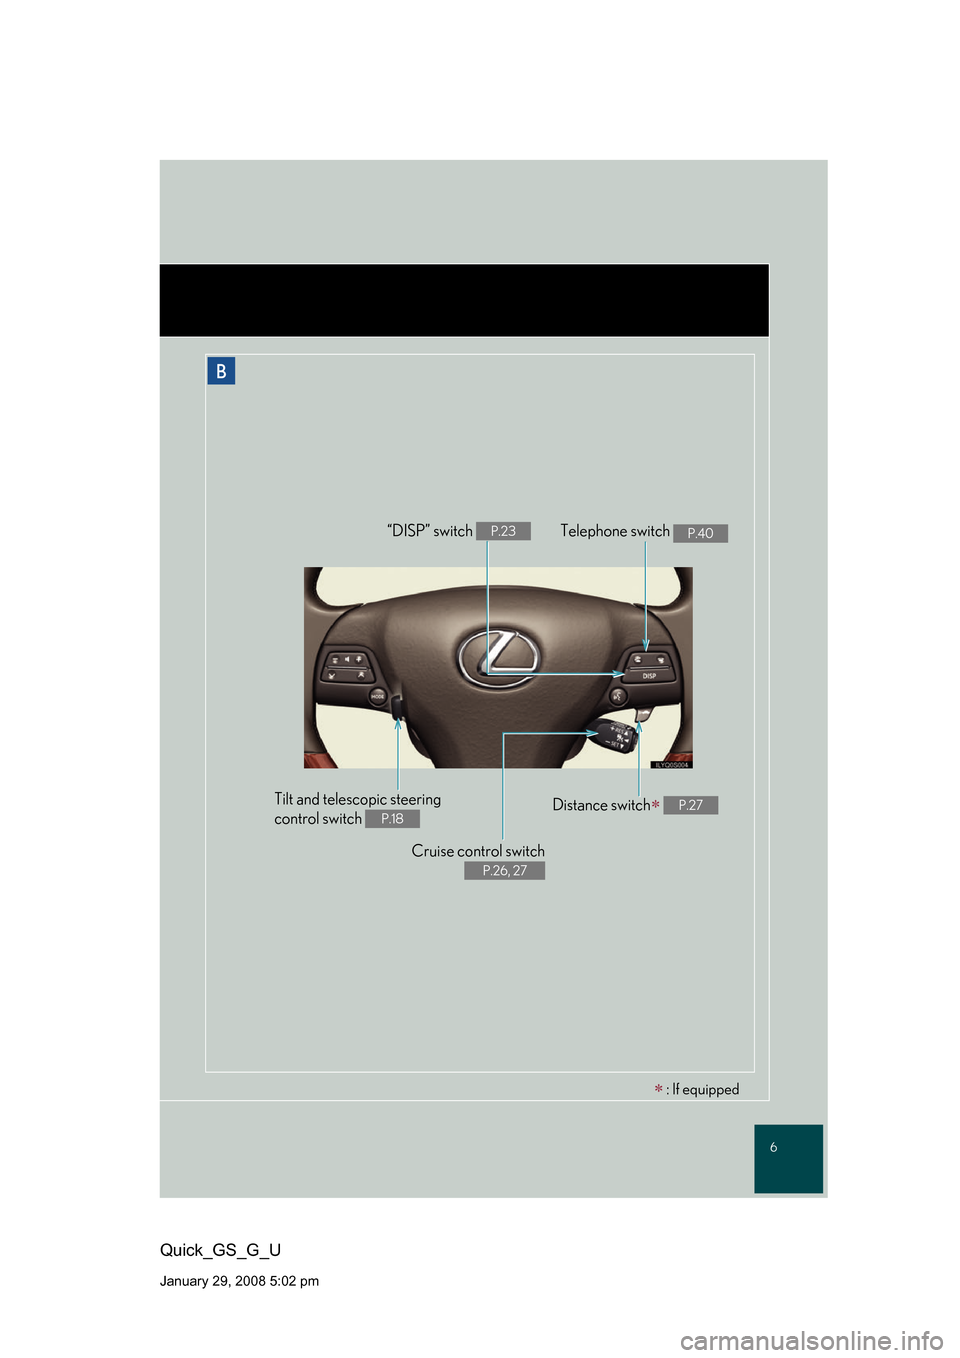 Lexus GS350 2008  Do-it-yourself maintenance / LEXUS 2008 GS460/350 QUICK GUIDE OWNERS MANUAL (OM30B04U) 6
Quick_GS_G_U
January 29, 2008 5:02 pm
B
Cruise control switch  
P.26, 27
Telephone switch P.40“DISP” switch P.23
Distance switch P.27Tilt and telescopic steering  
control switch 
P.18
